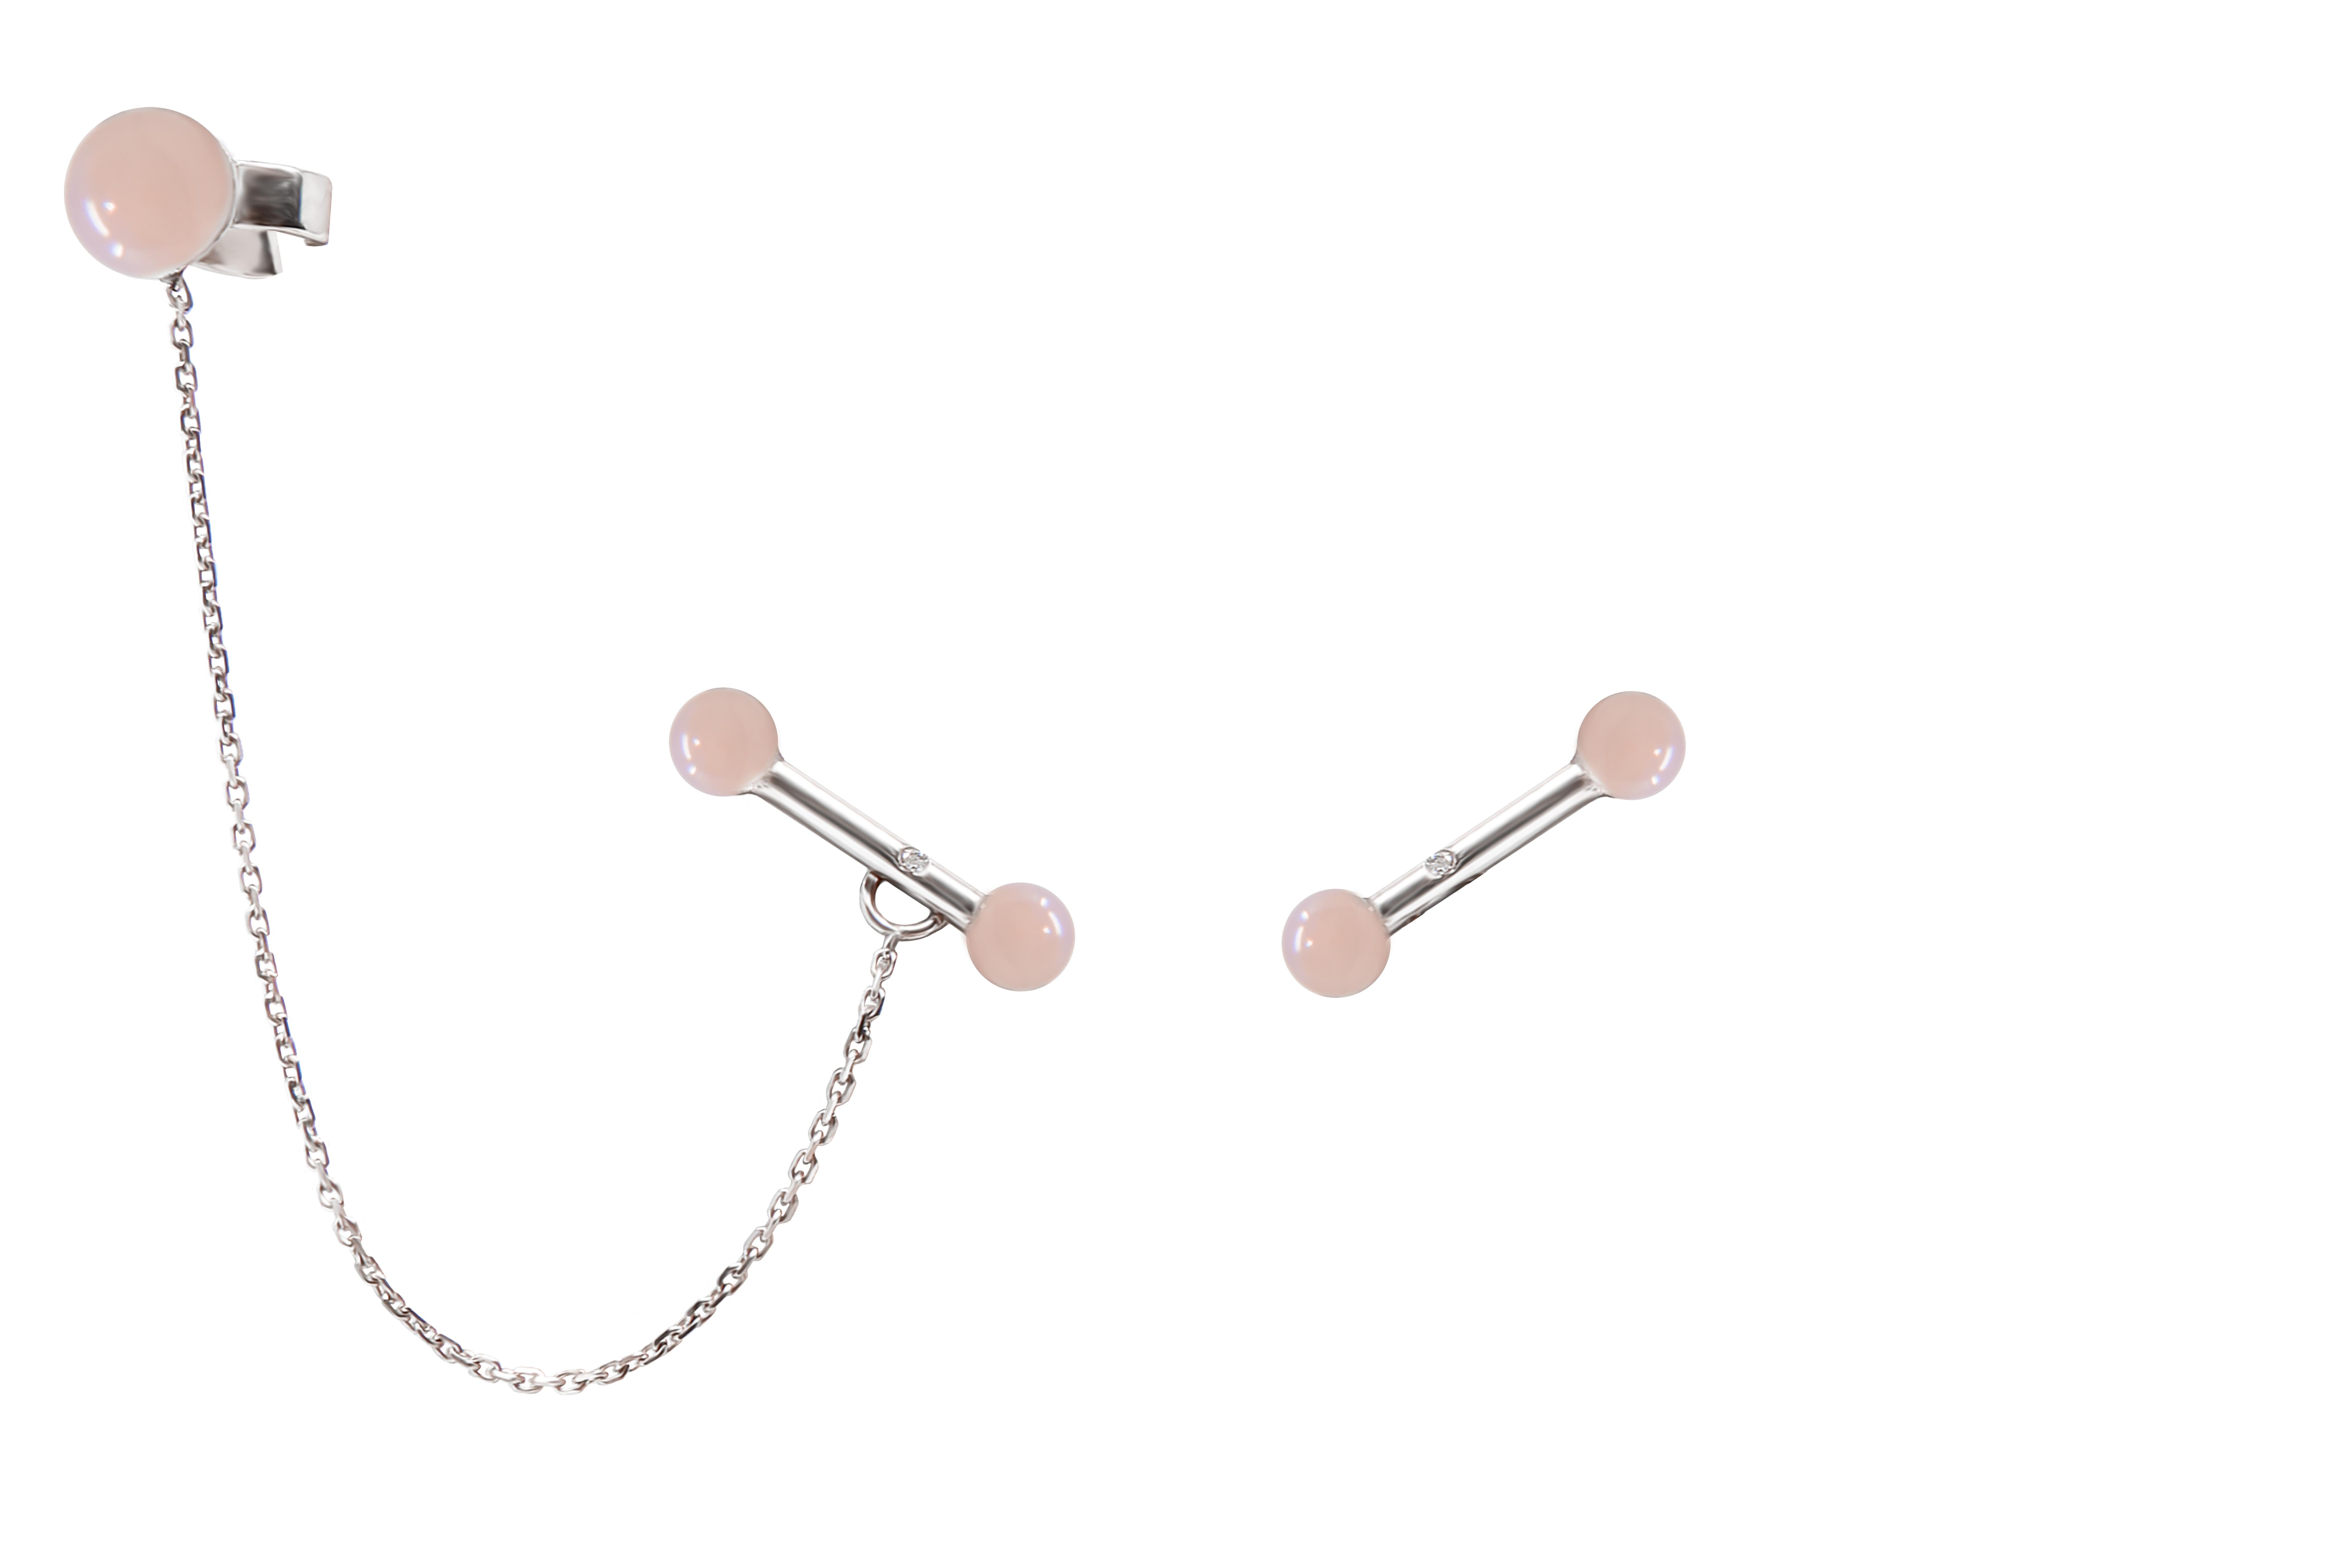 18 Carat White Gold Earrings with Diamond, Pink Opal and a Pink Opal Cuff Chained.  Earrings can be worn with or without the Pink Opal pearl cuff.
HAND CARVED STONES made from a Specific Unique Designed. HANDCRAFTED IN FRANCE.
The Designer,